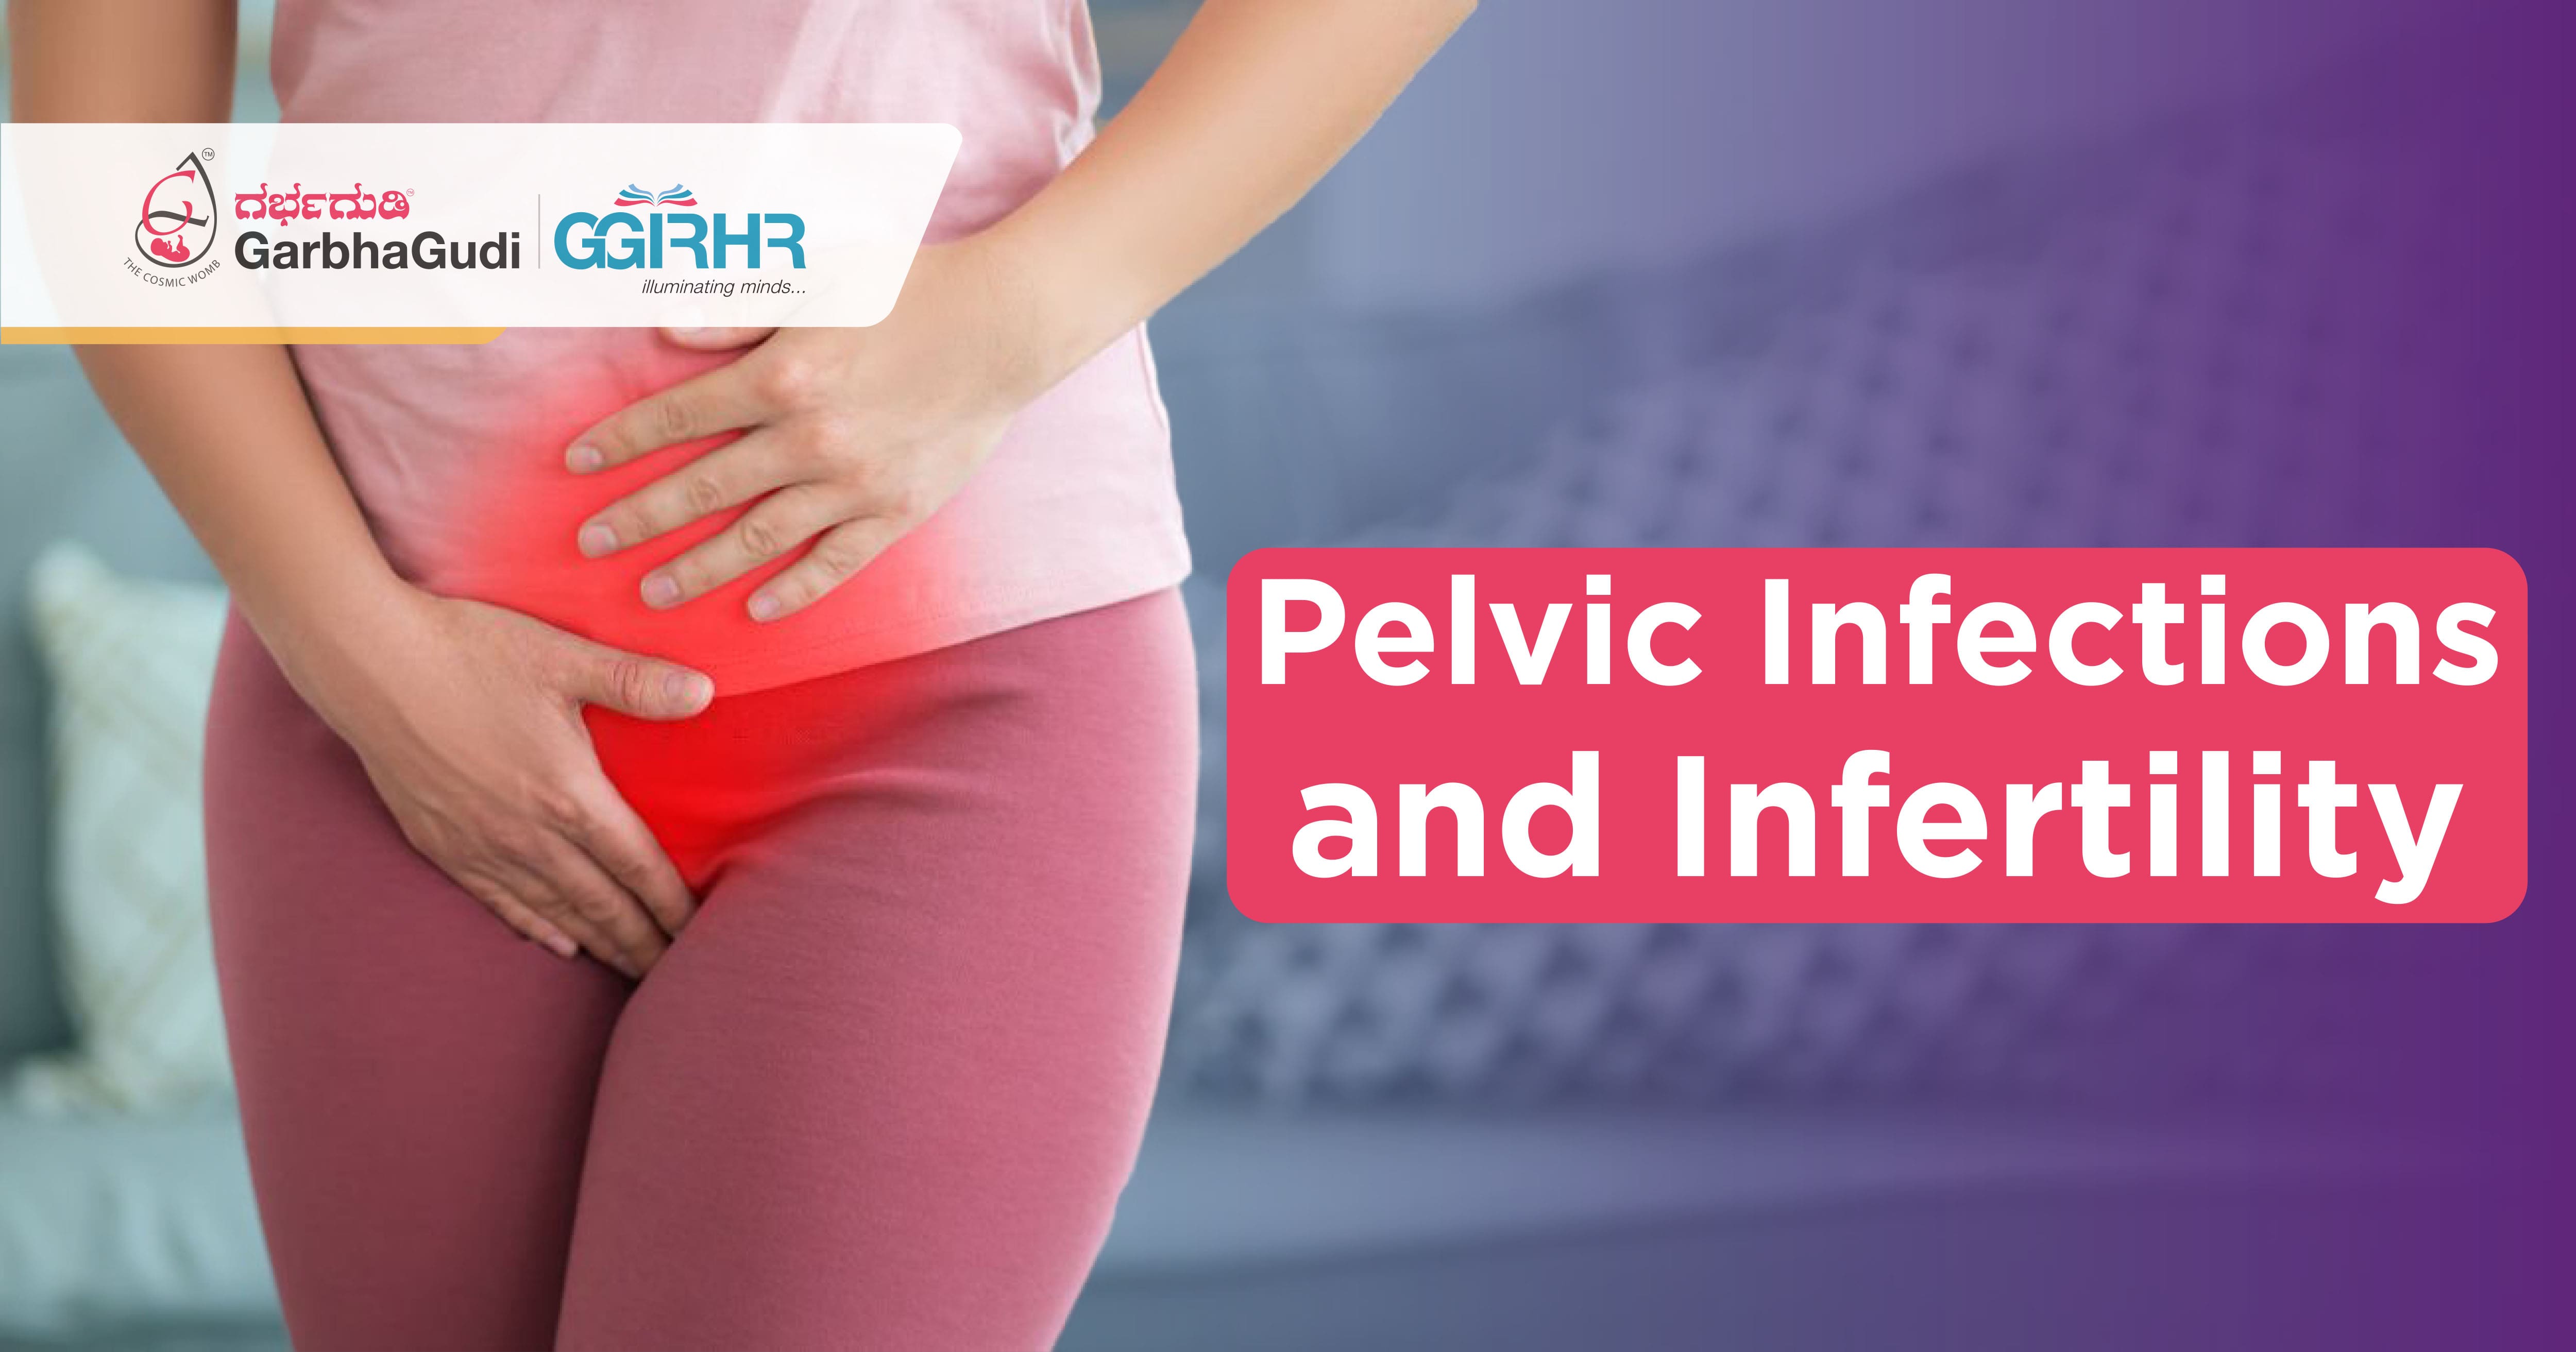 Pelvic Infections and Infertility